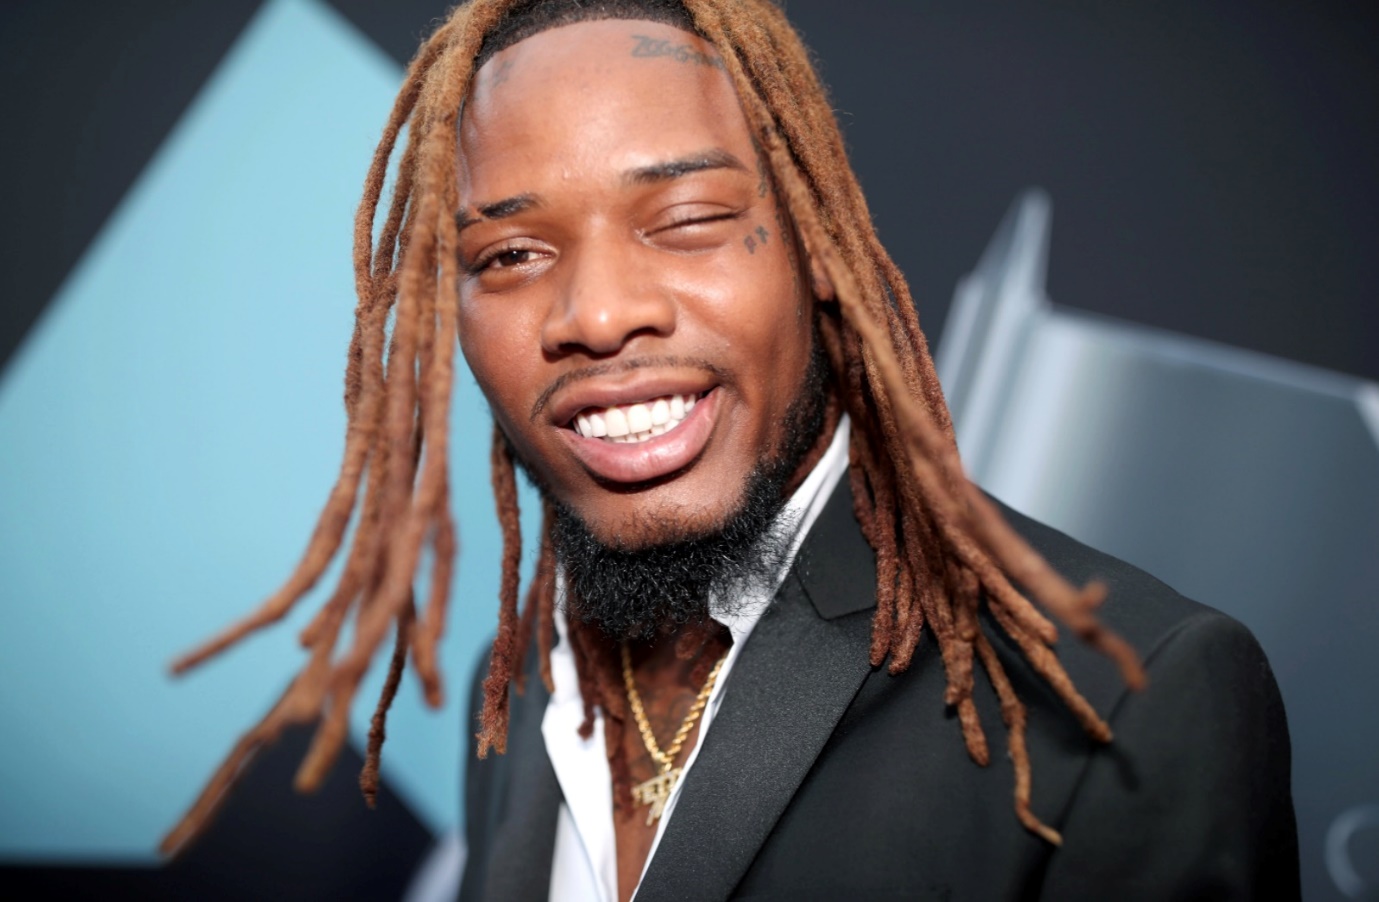 Fetty Wap Explains Why He Disappeared After Meteoric Rise - Gems Radio